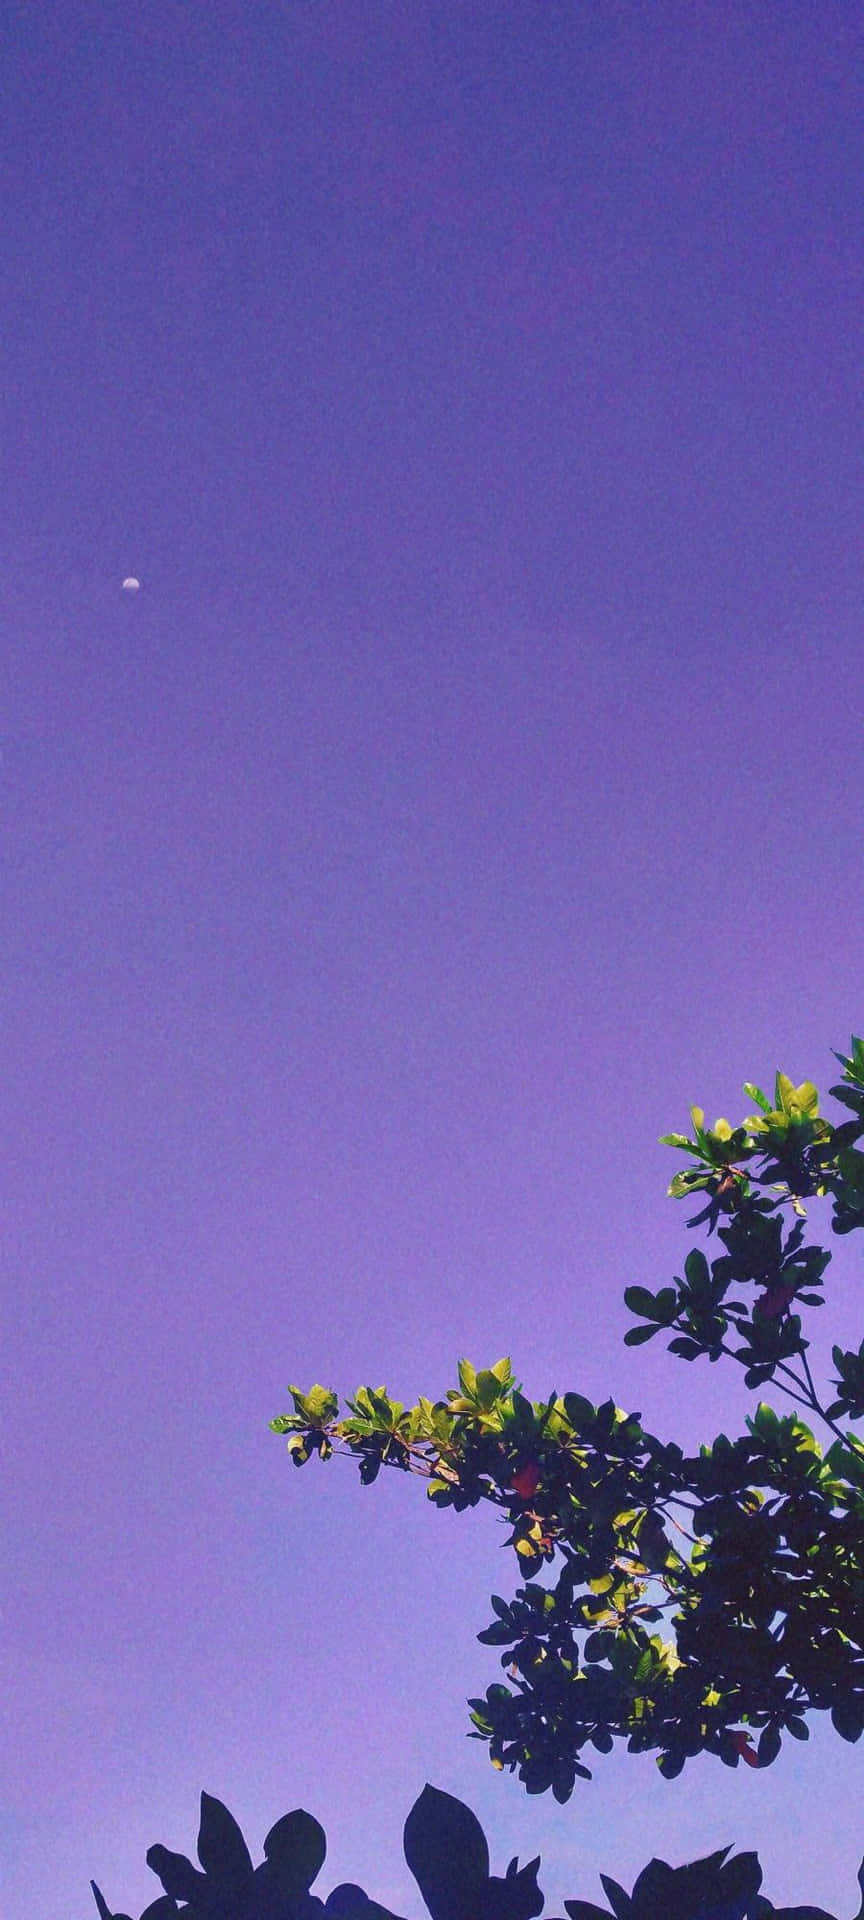 Lilac Color Sky With Leaves Wallpaper